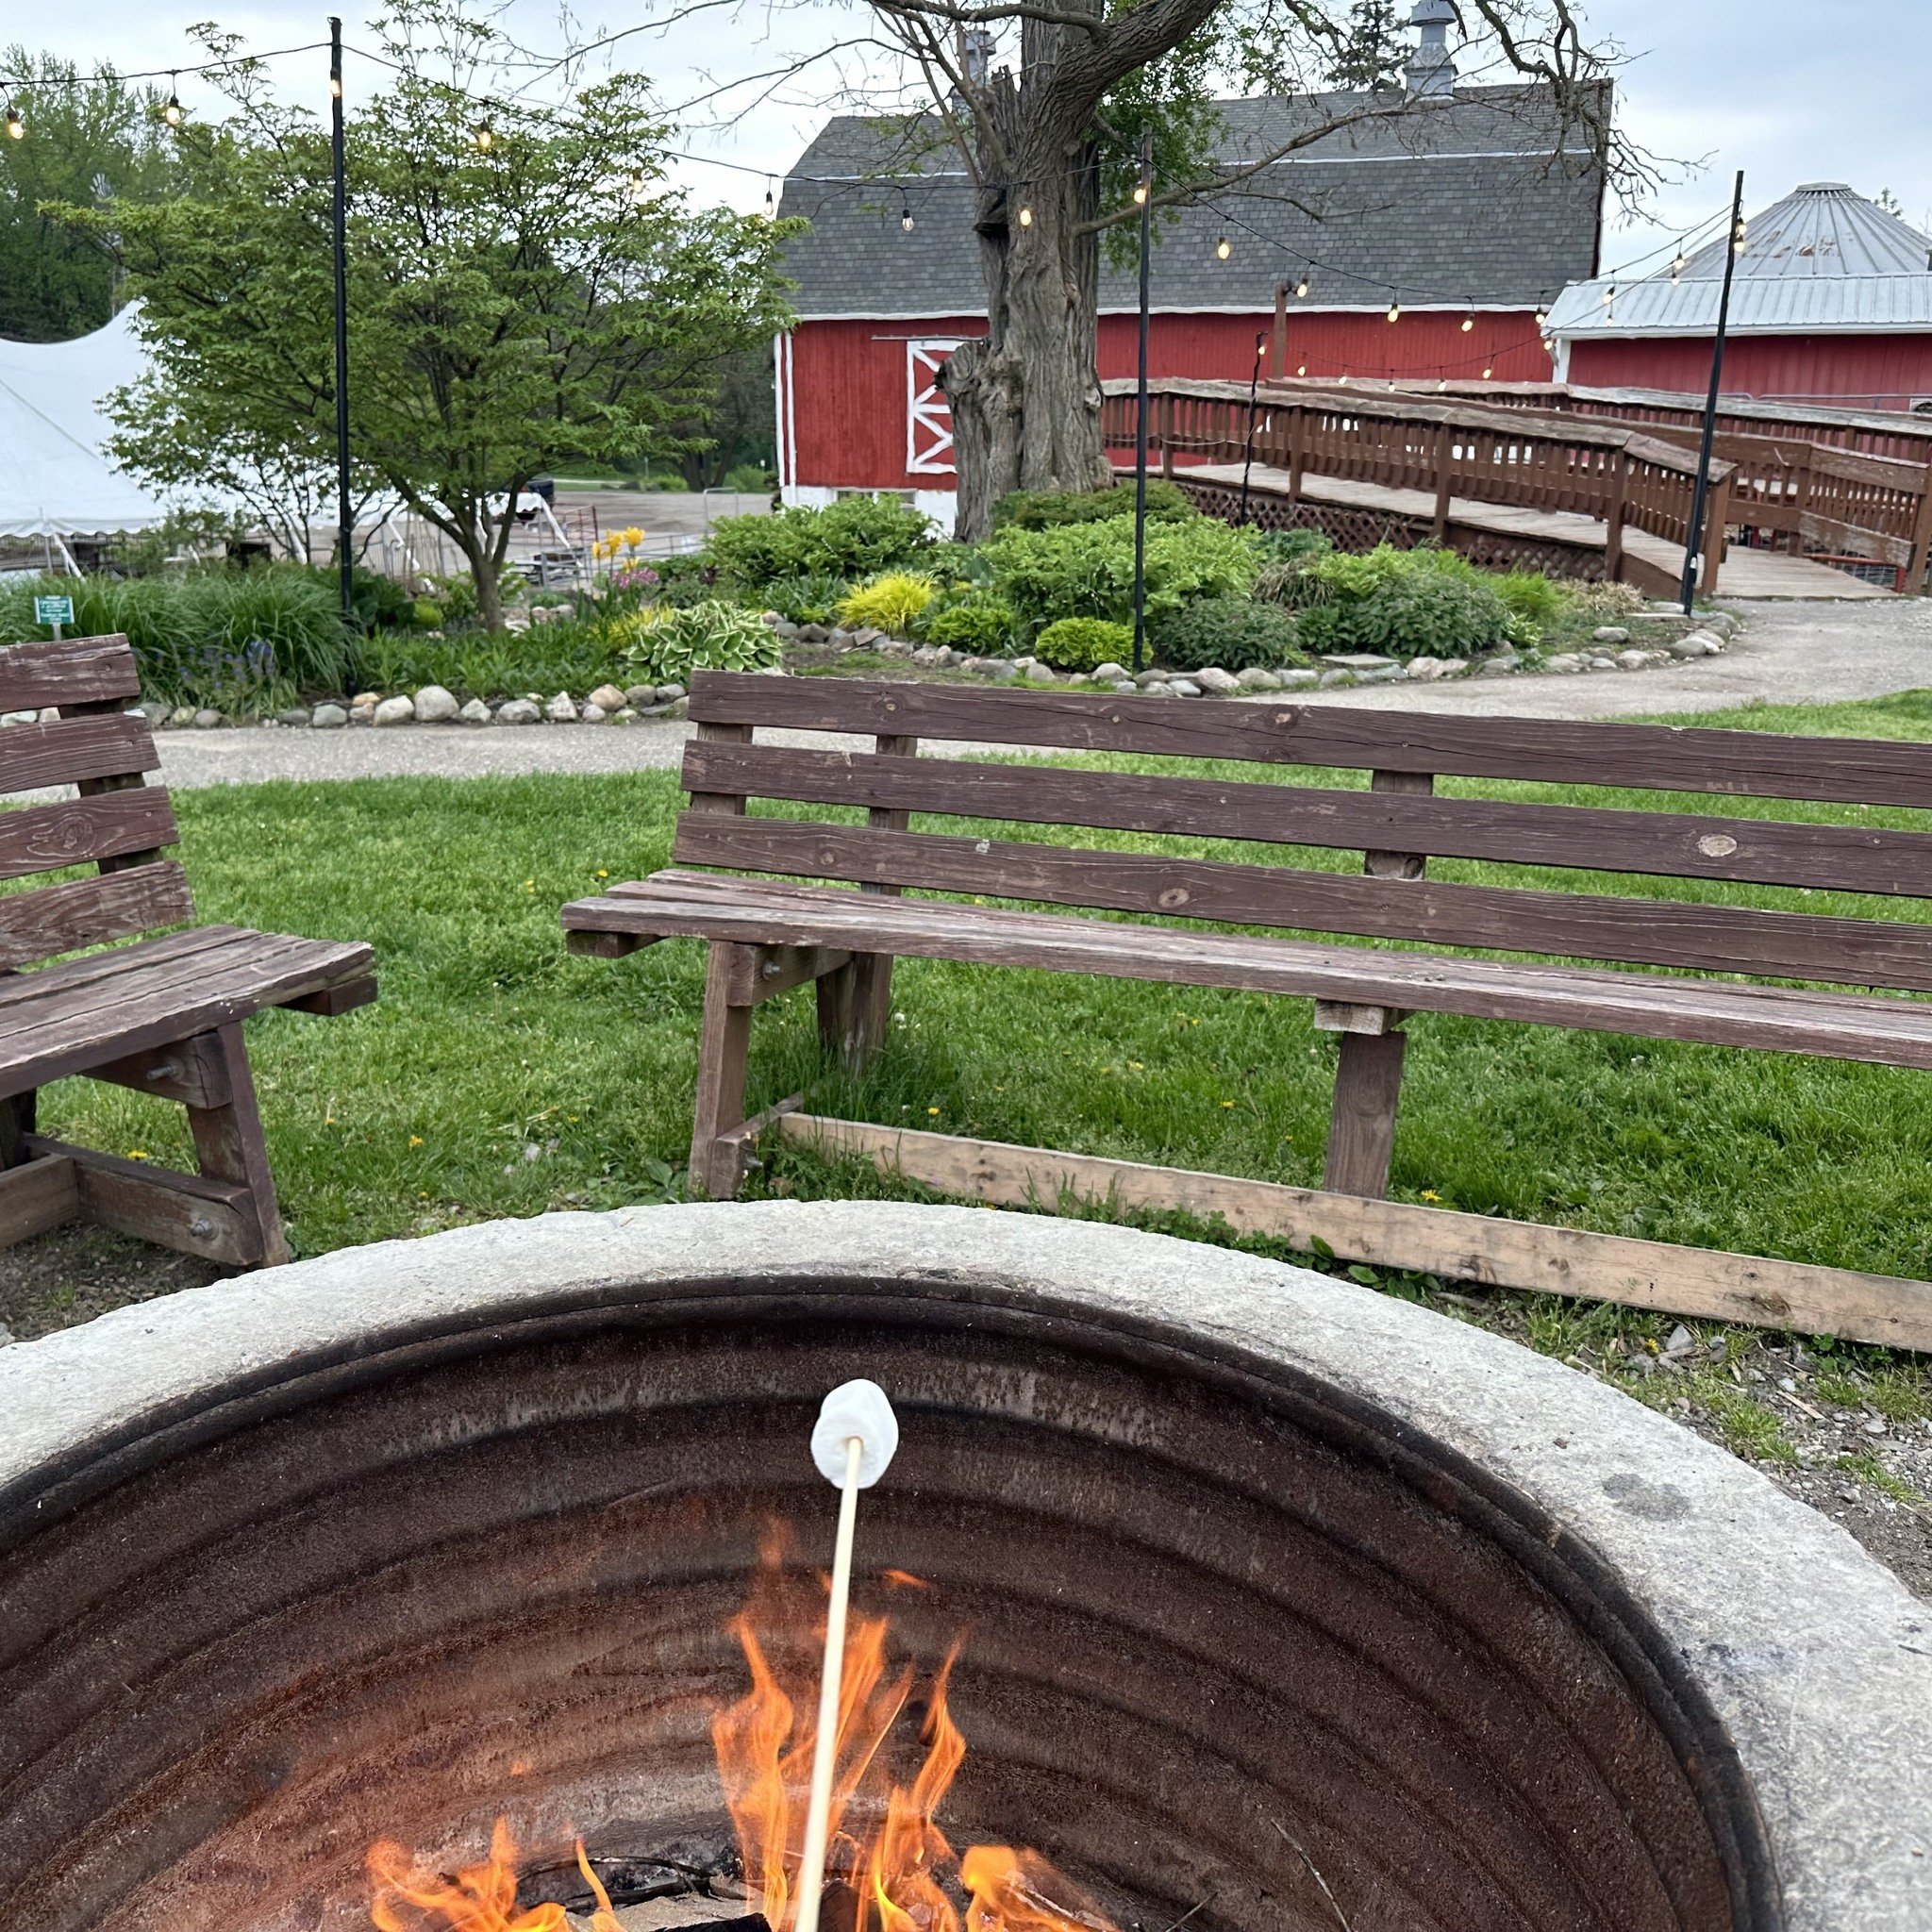 Need a different sort of date night idea?  A new place to check out with friends on a Saturday night?  A space for the kids to burn off some outdoor energy before bed? 
Barns are open until 8pm!  Wagon rides are running until 7:30pm. 
Since its coole